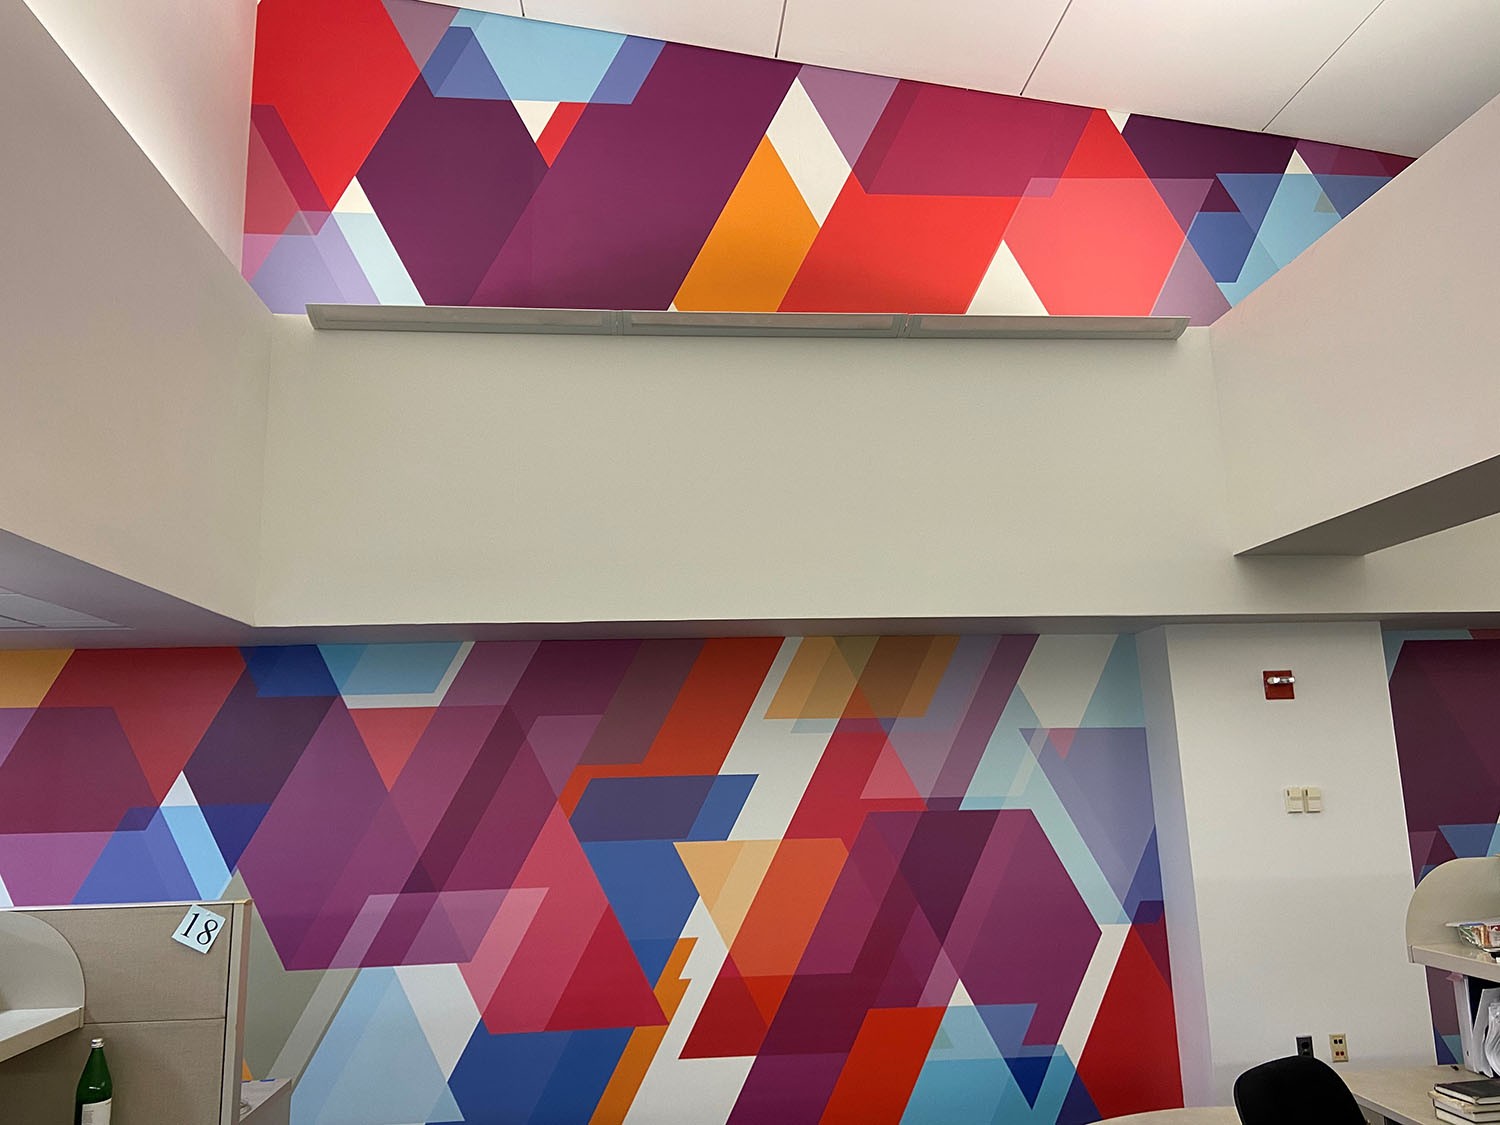 "After" photo of the ISERP space. The formerly-white ceiling and walls are now covered in the colorful, zig-zag pattern of the custom wall graphic, making the space look more vibrant, finished, and welcoming.